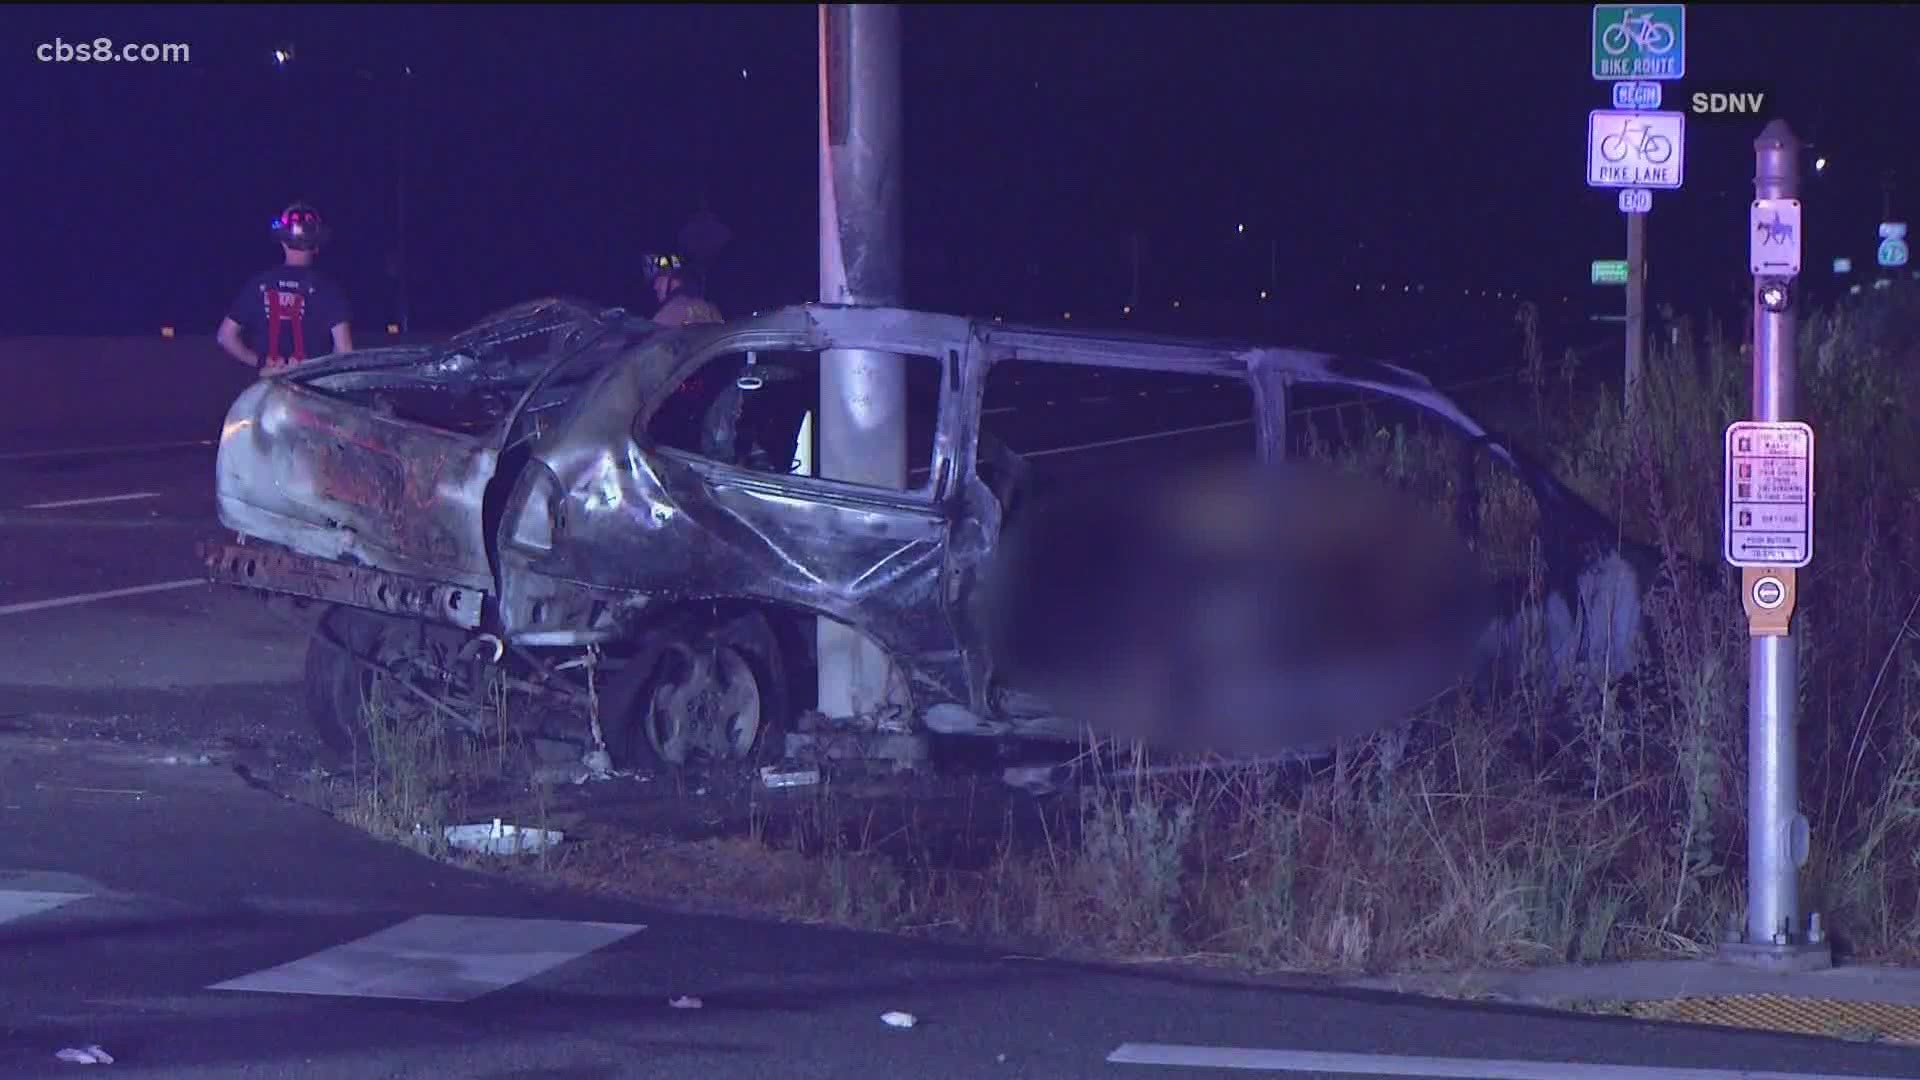 The driver of a minivan crashed into a traffic signal, sparking a fire.